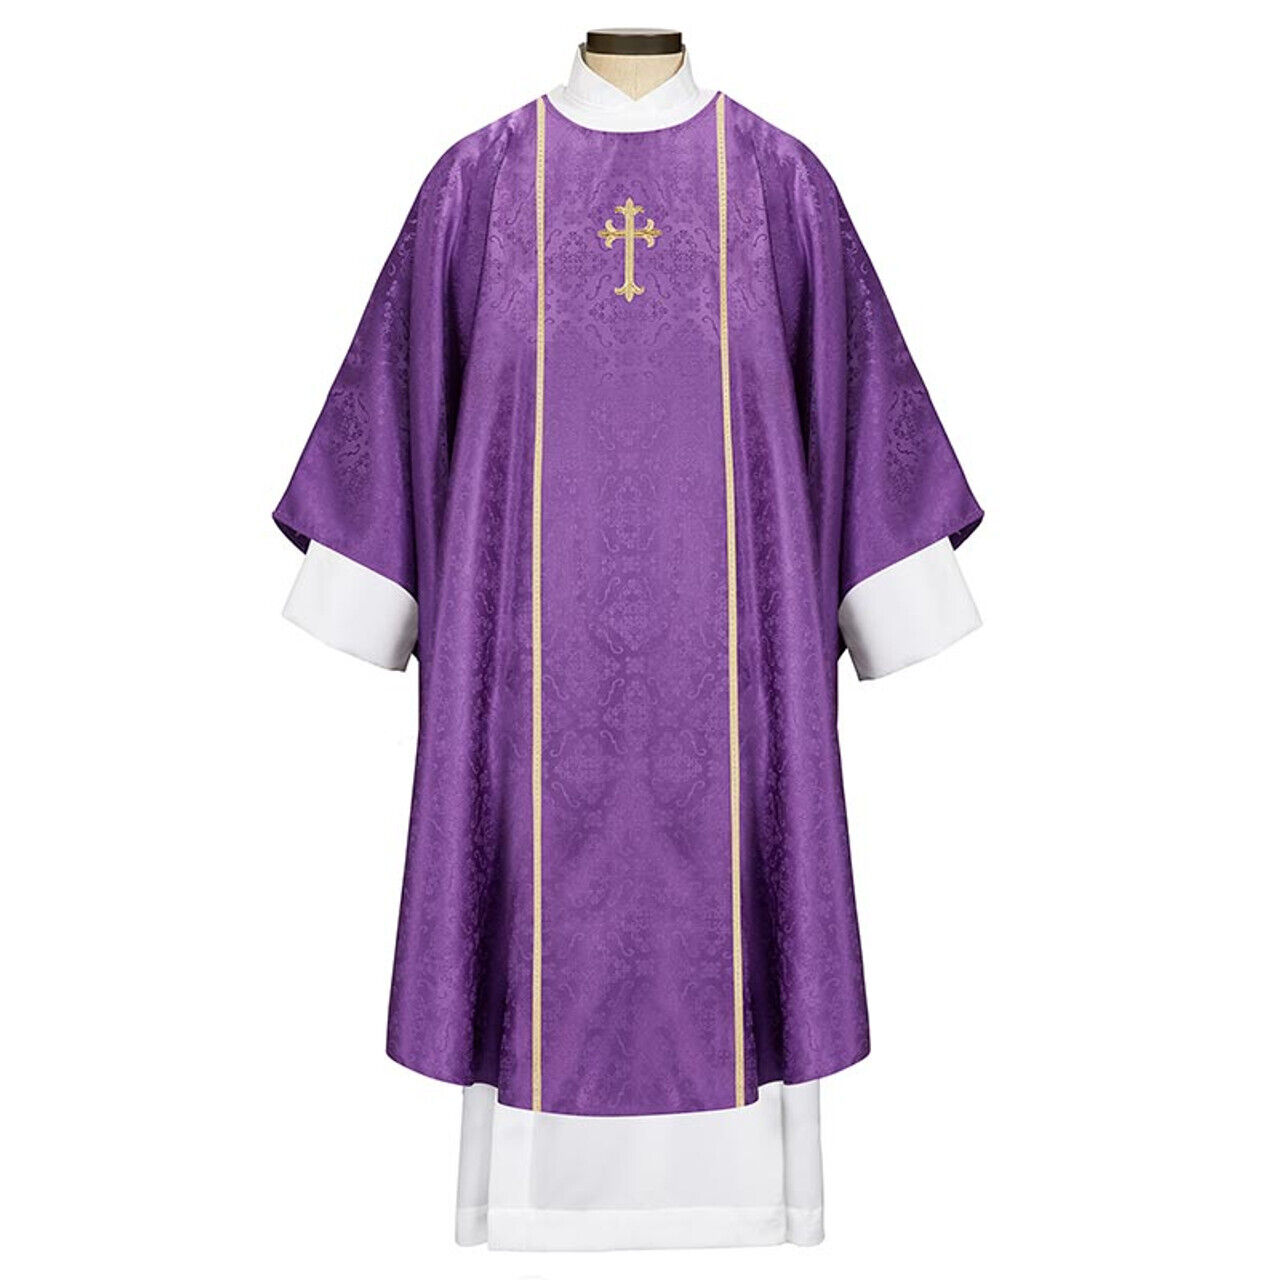 Catholic Vestment Gothic Style Chasuble Marseille Jacquard 51 In x 59 In Purple